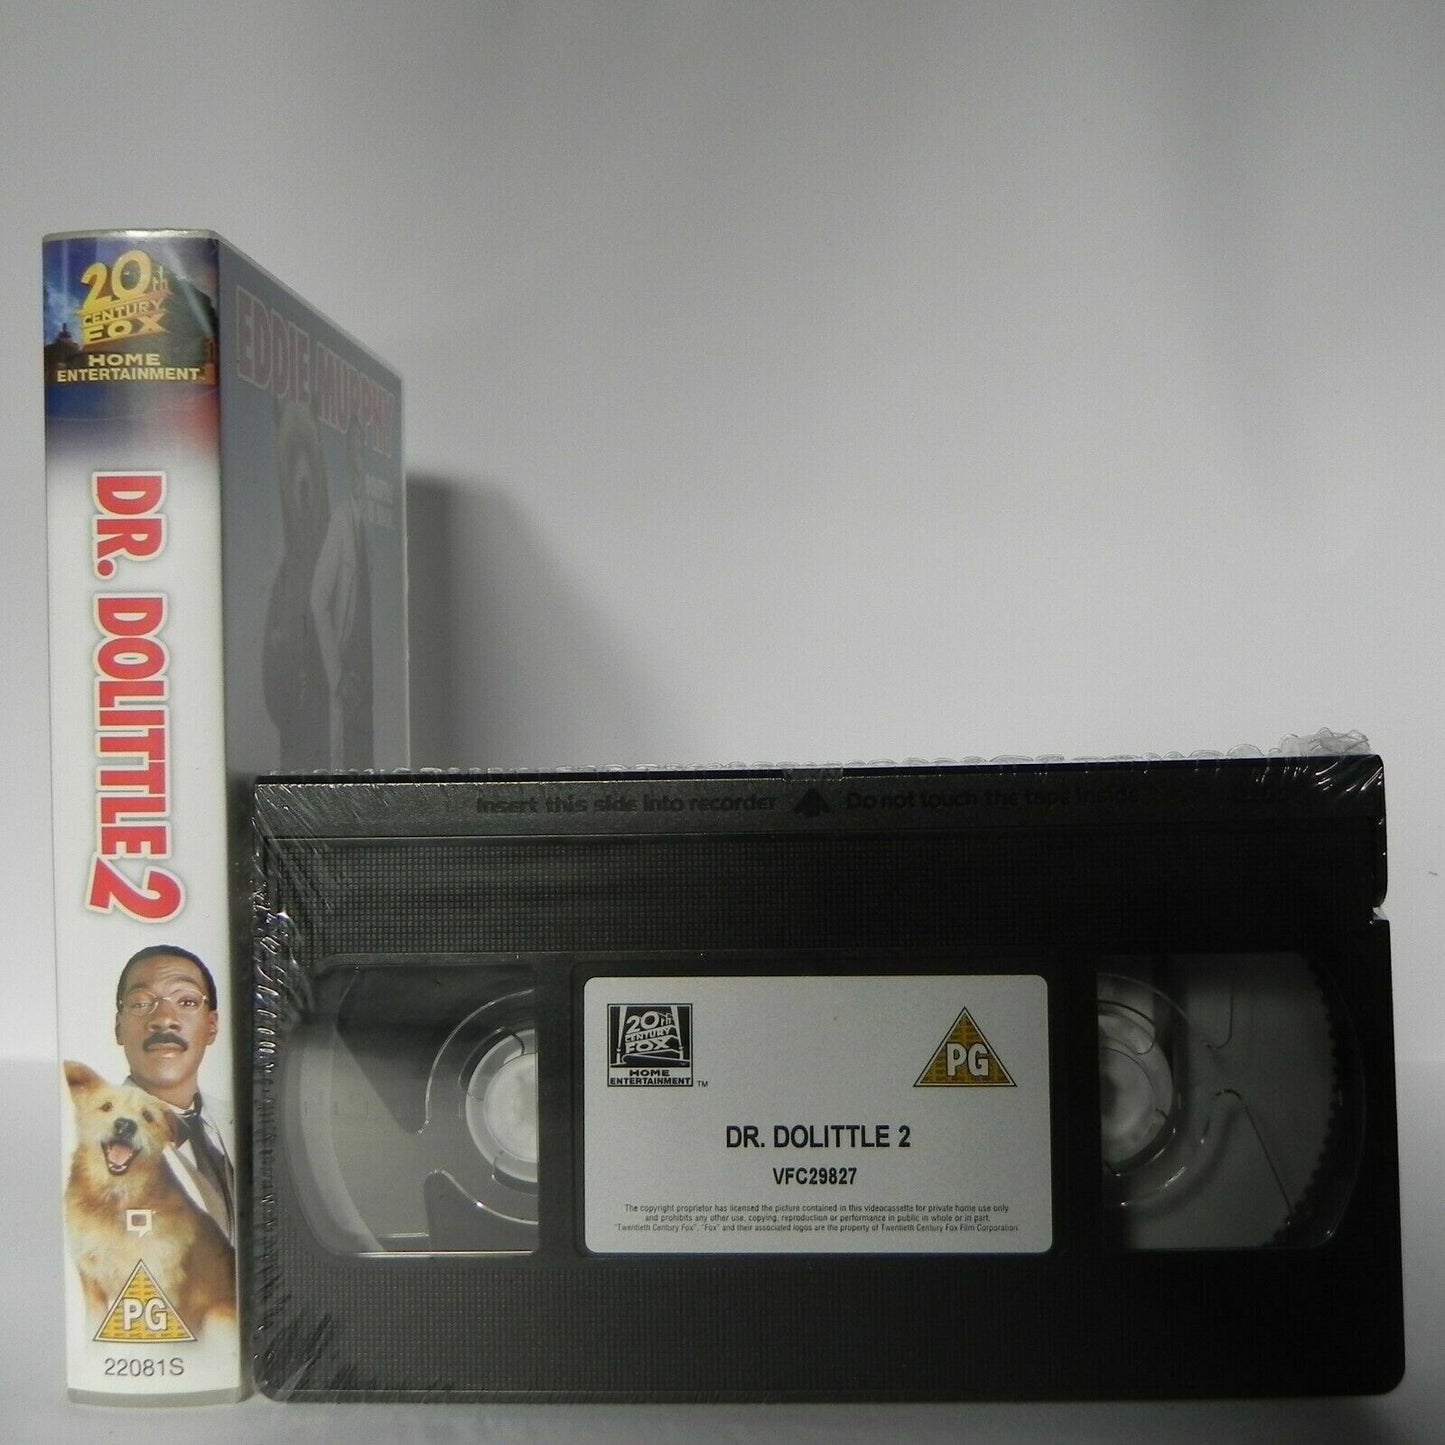 Dr. Dolittle 2 - 20th Century - Comedy - Family - Kids - Eddie Murphy - Pal VHS-